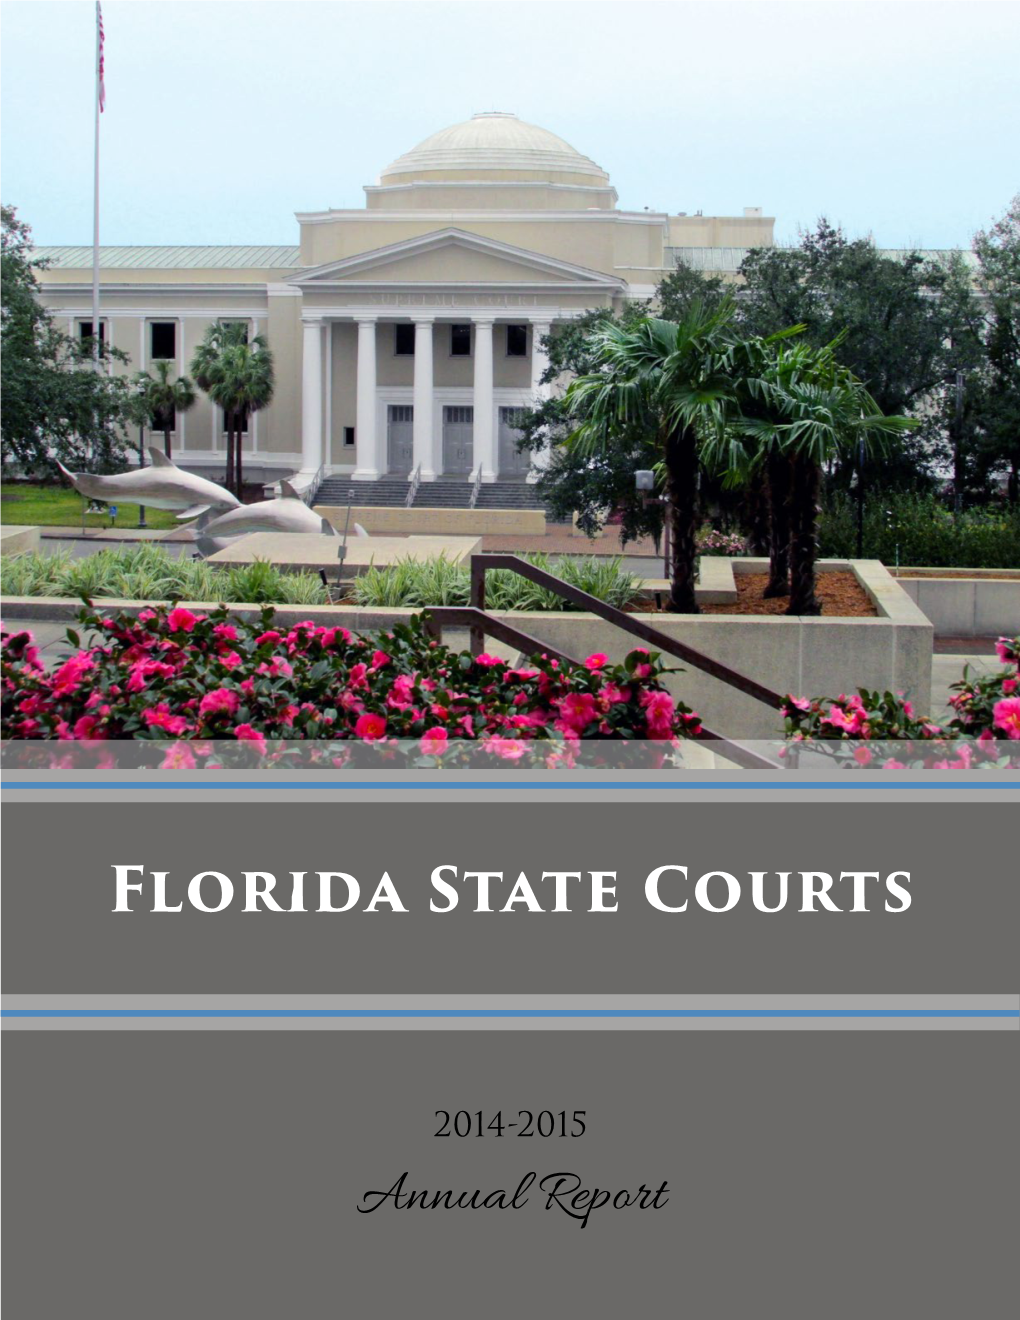 Florida State Courts 2014-2015 Annual Report